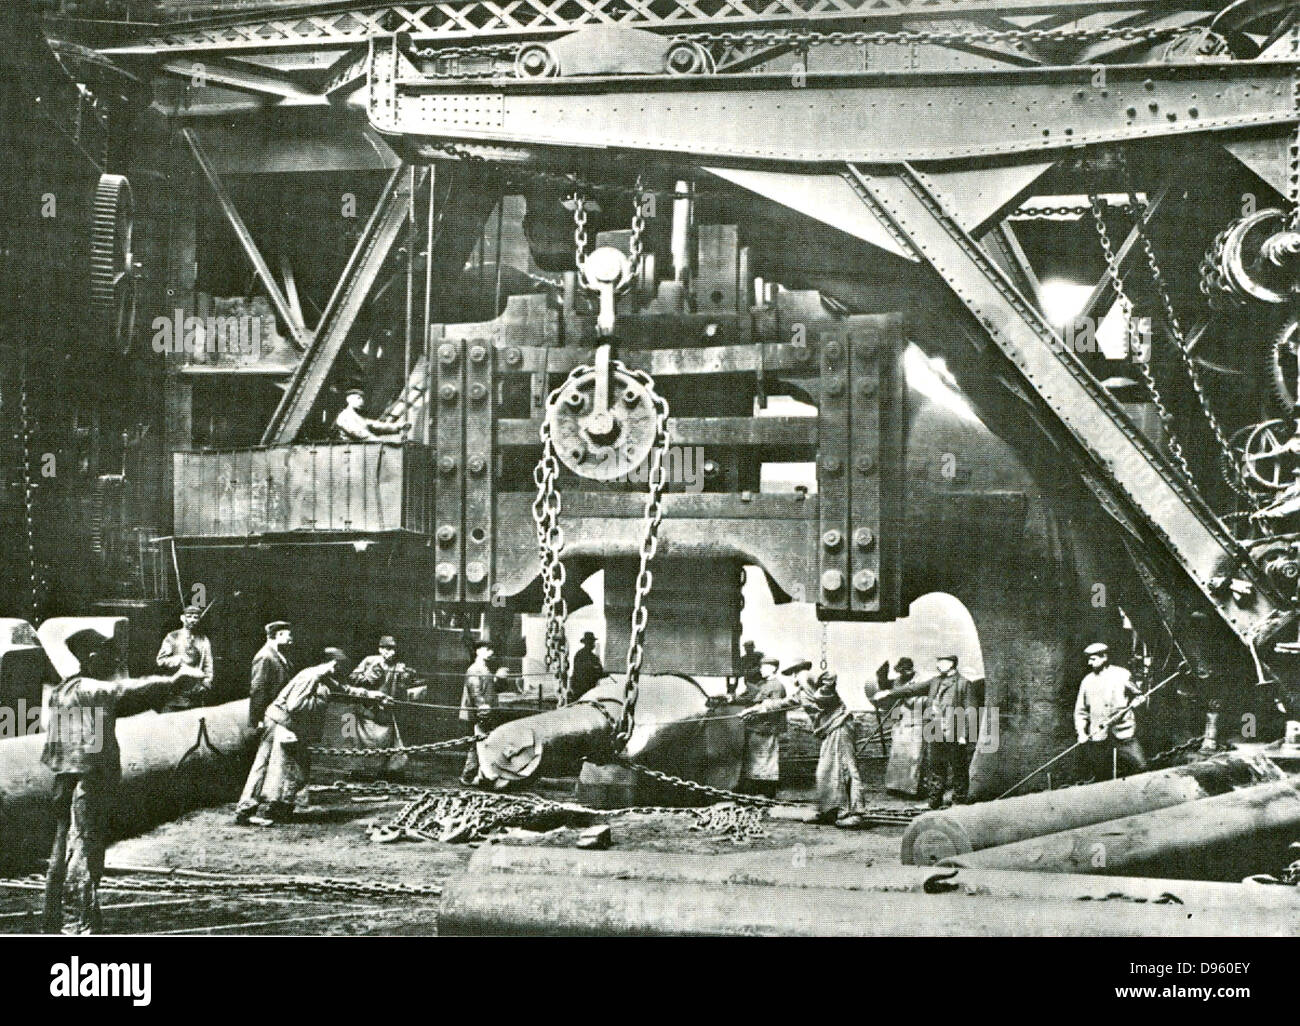 Giant steam hammer 'Fritz' in action at the Krupp works at Essen, late 19th century. Stock Photo